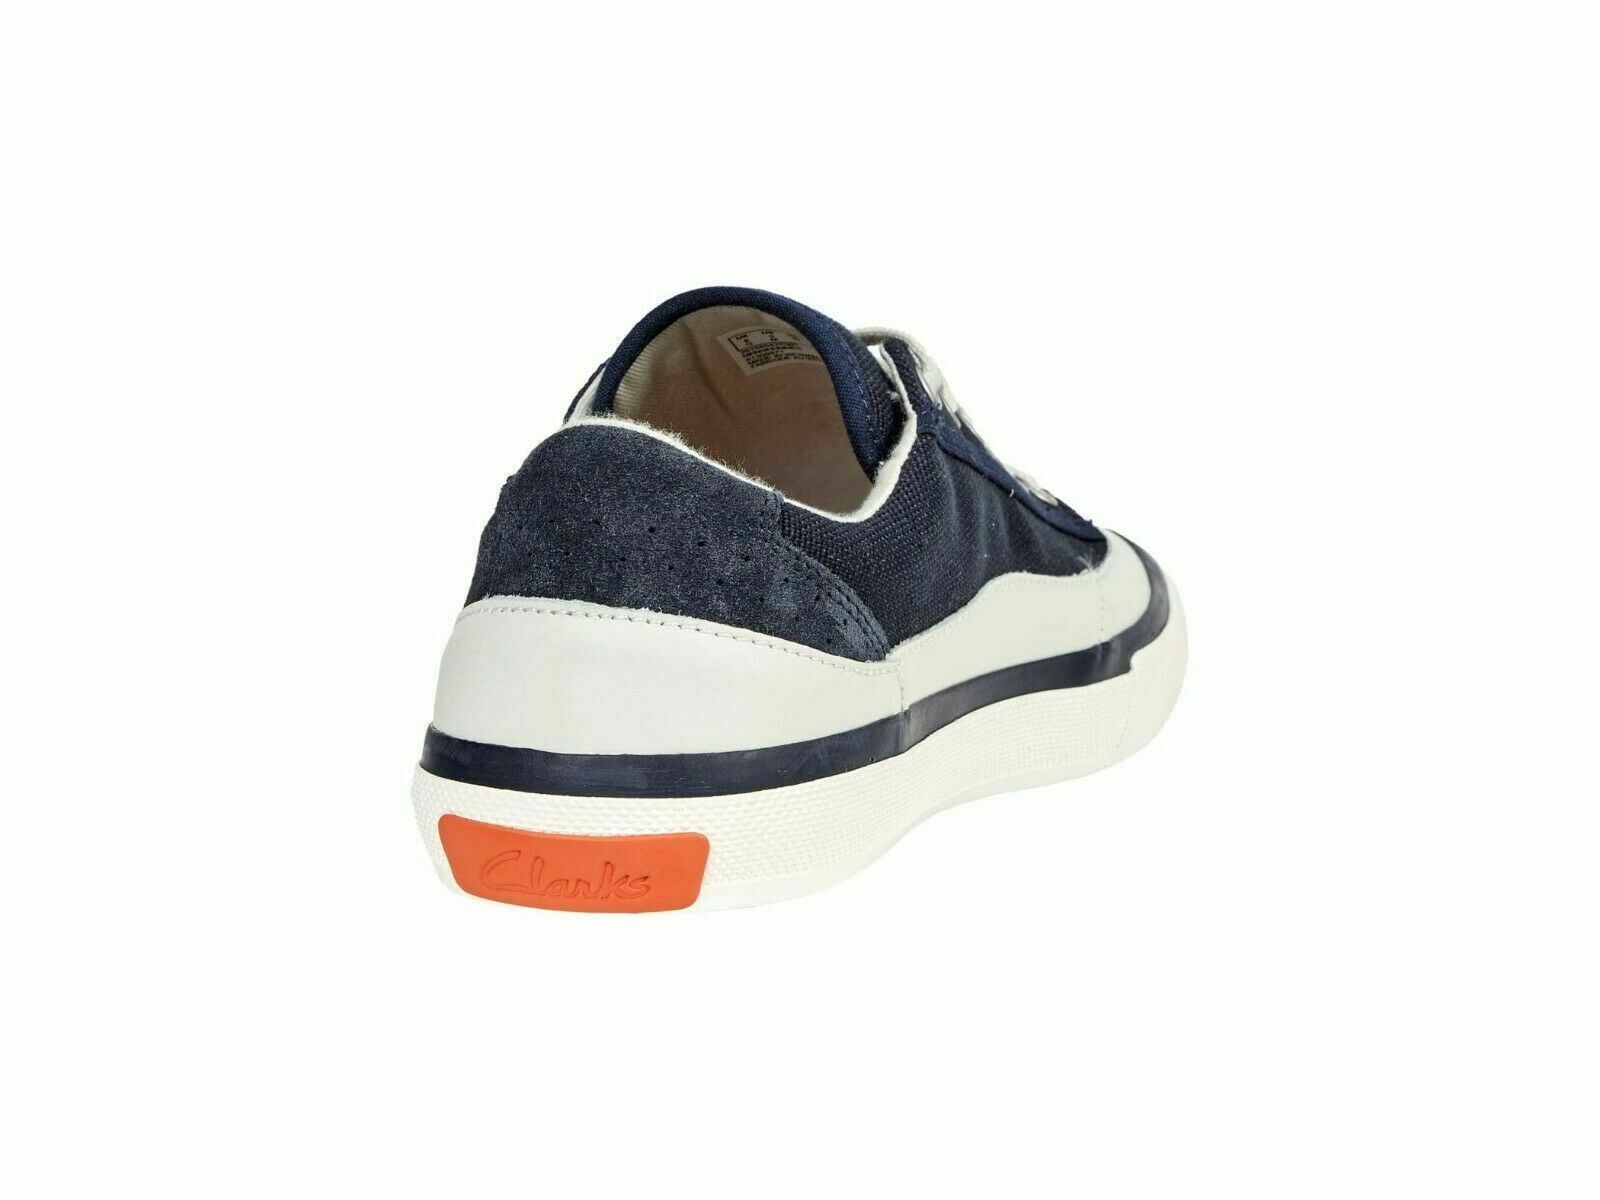 Men's Shoes Clarks ACELEY LACE Casual Lace Up Sneakers 58543 NAVY CANVAS